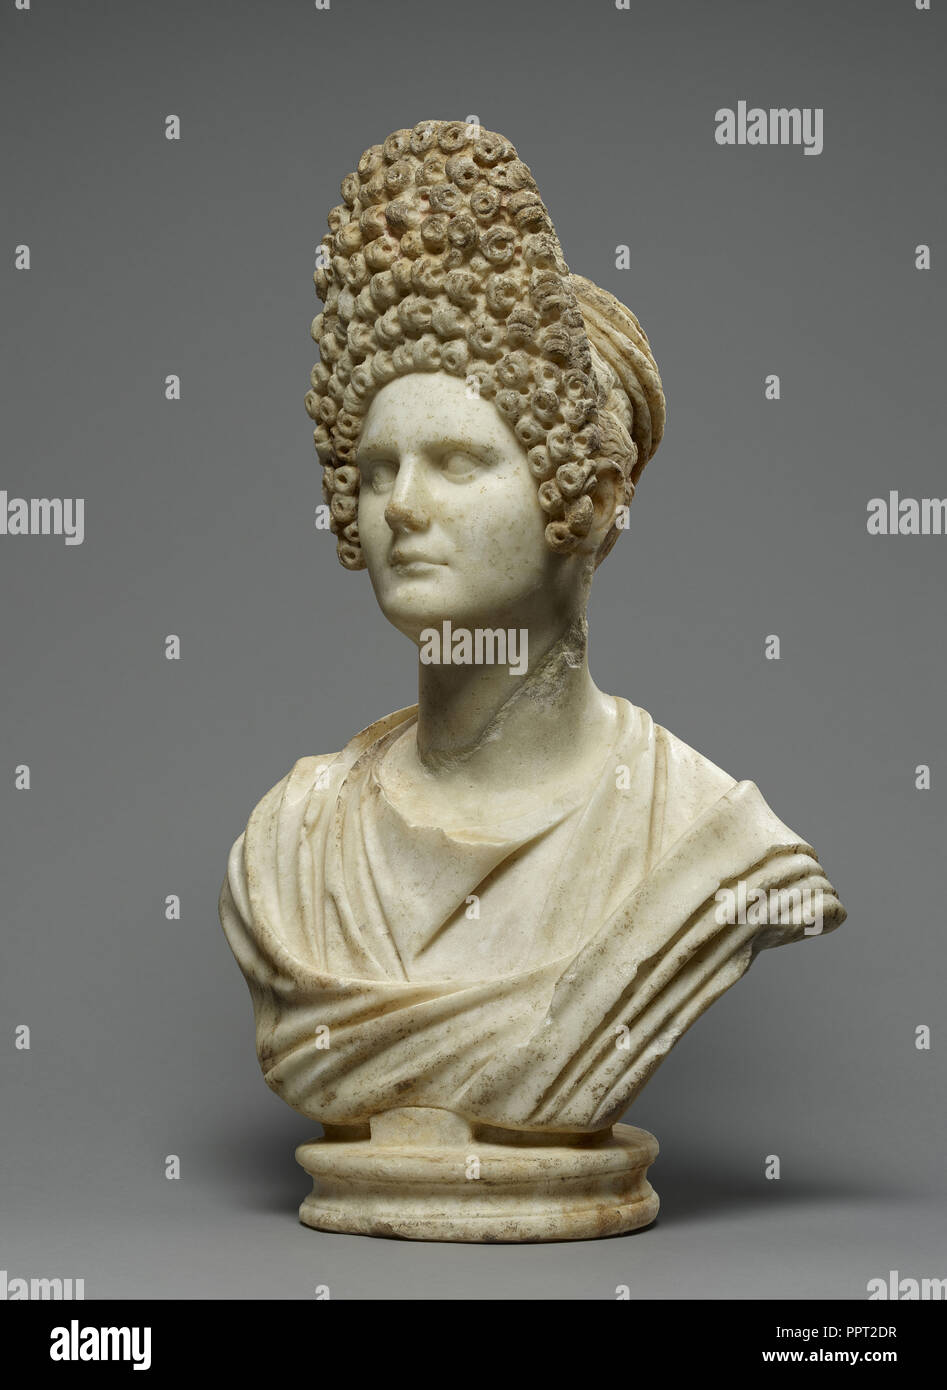 Bust of a Flavian Woman; Roman Empire; late 1st century; Italian marble; 68  × 41 × 22 cm, 26 3,4 × 16 1,8 × 8 11,16 in Stock Photo - Alamy